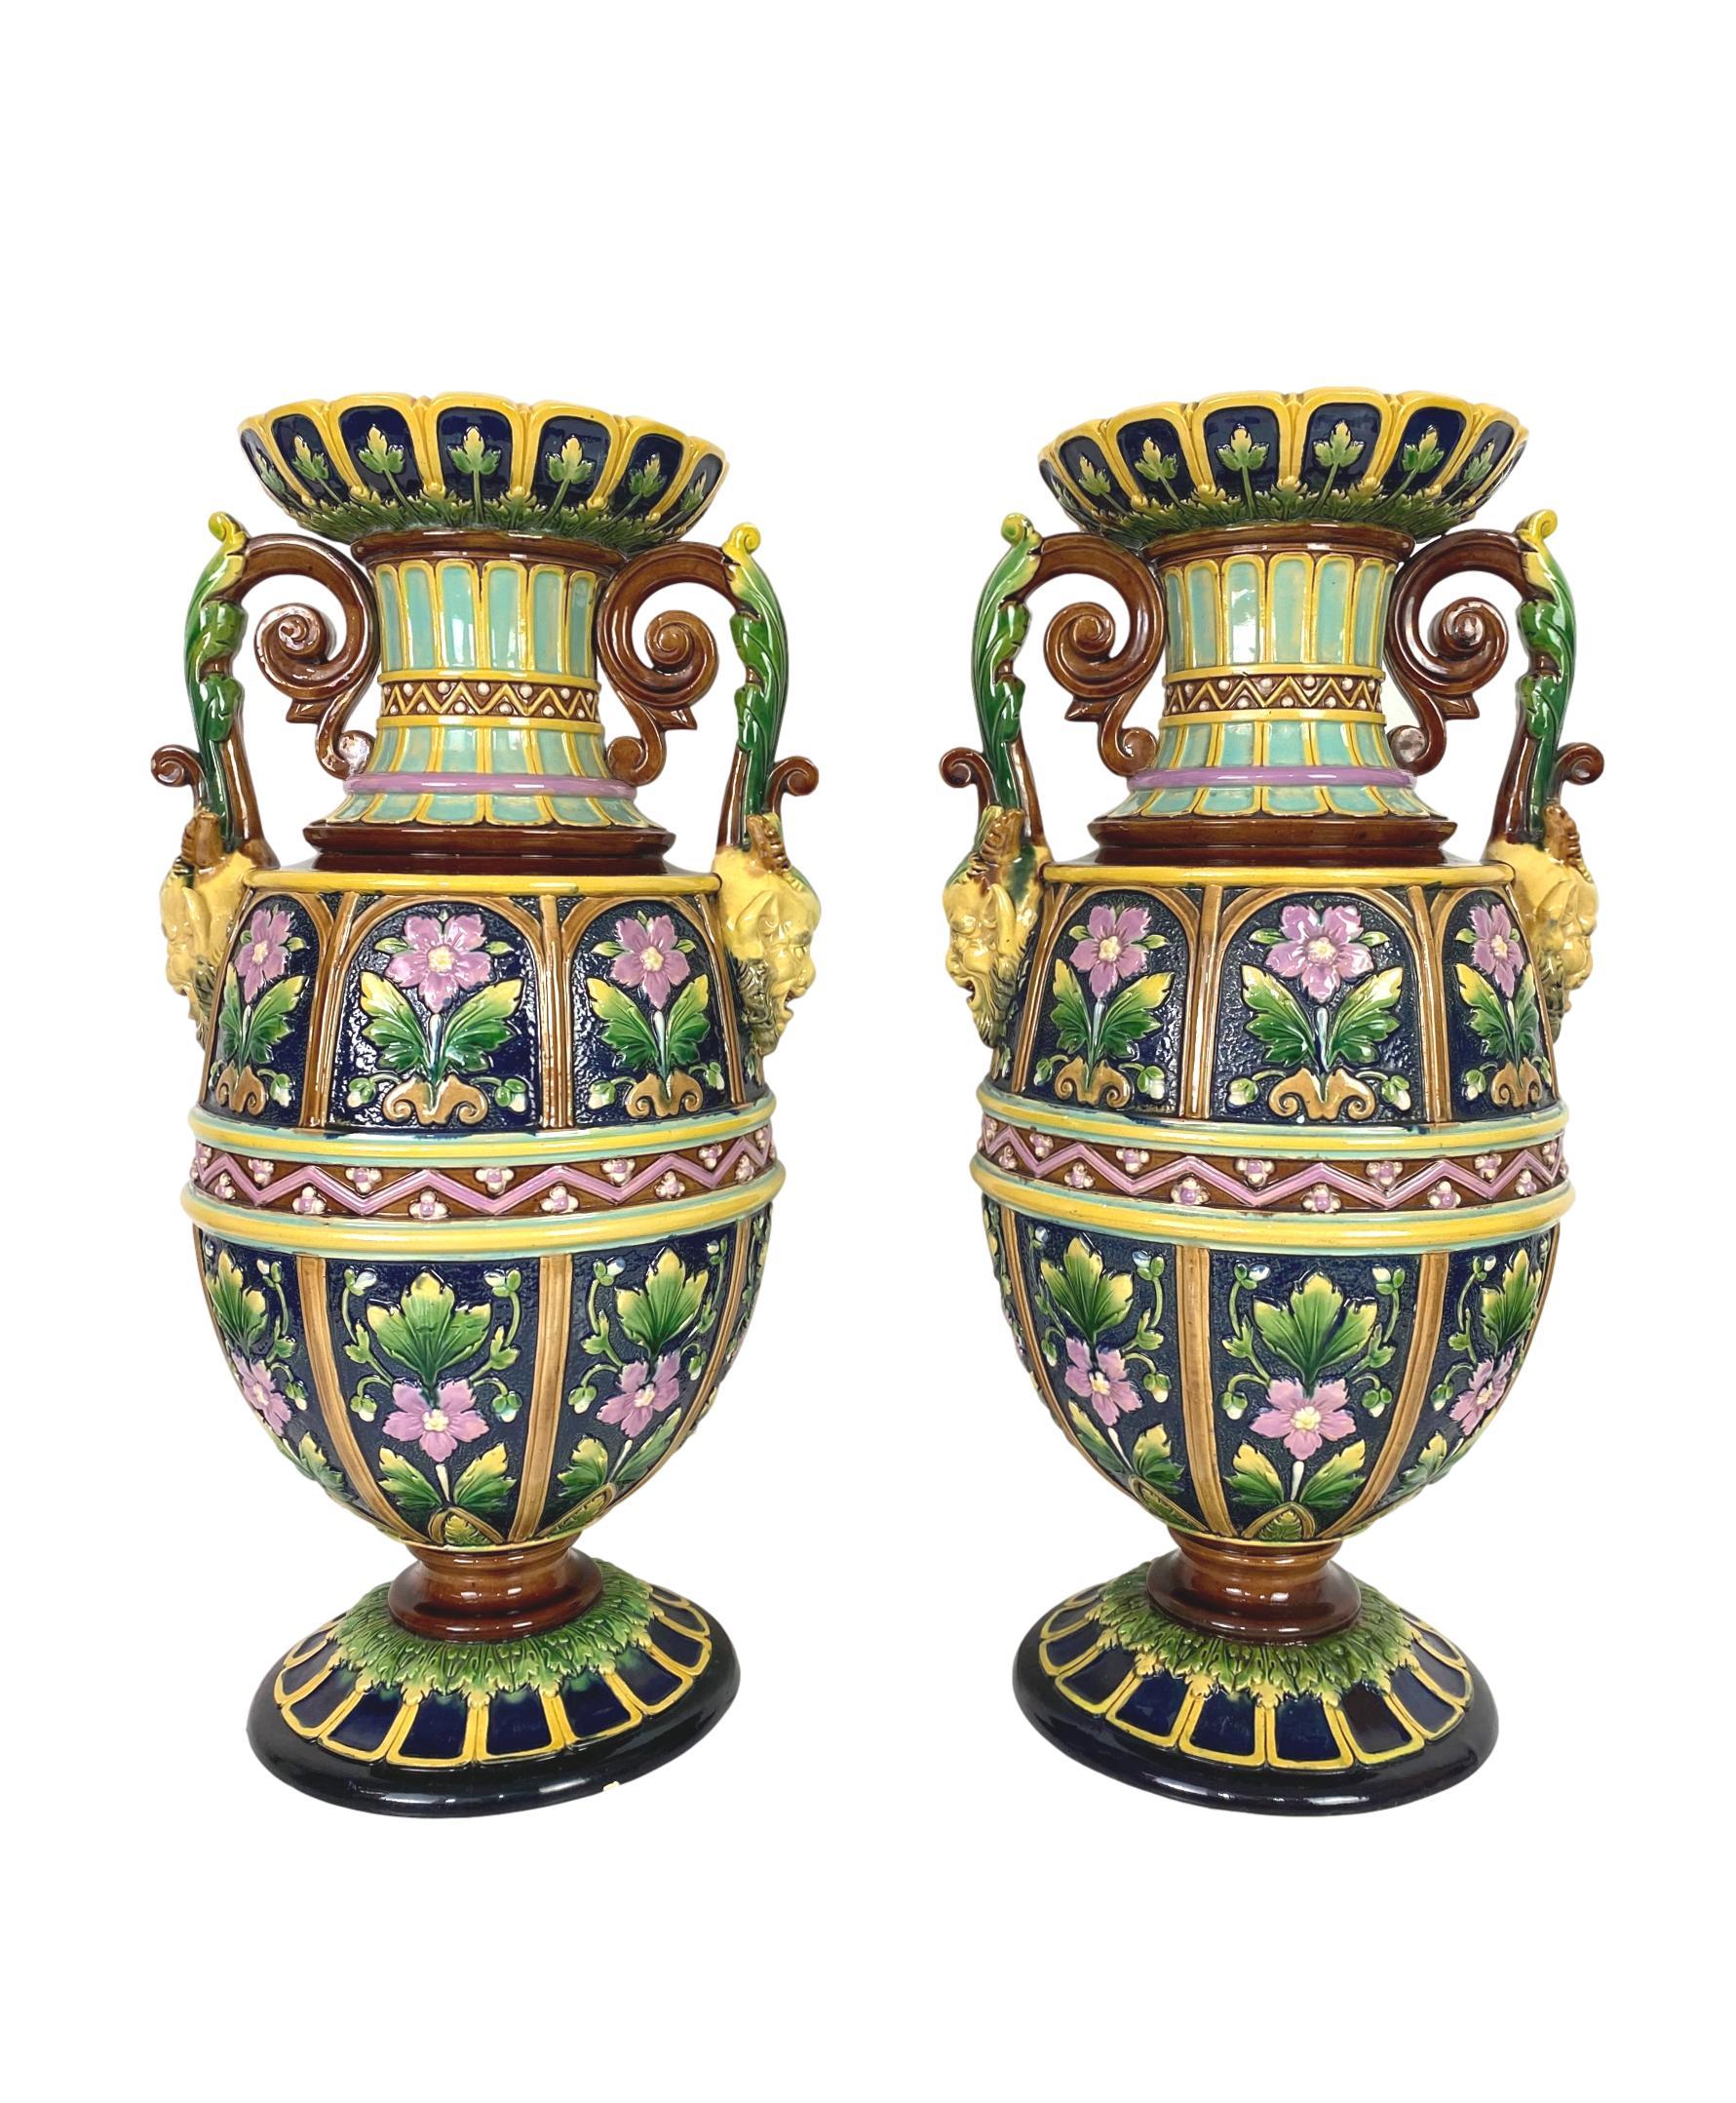 Impressive pair of aesthetic movement Majolica vases or urns signed Wilhelm Schiller and Son, Bohemia, circa 1880, measures: Height 17.25 inches.
Of baluster-form, the flared mouth with foliate panels glazed in yellow, green, and cobalt, with